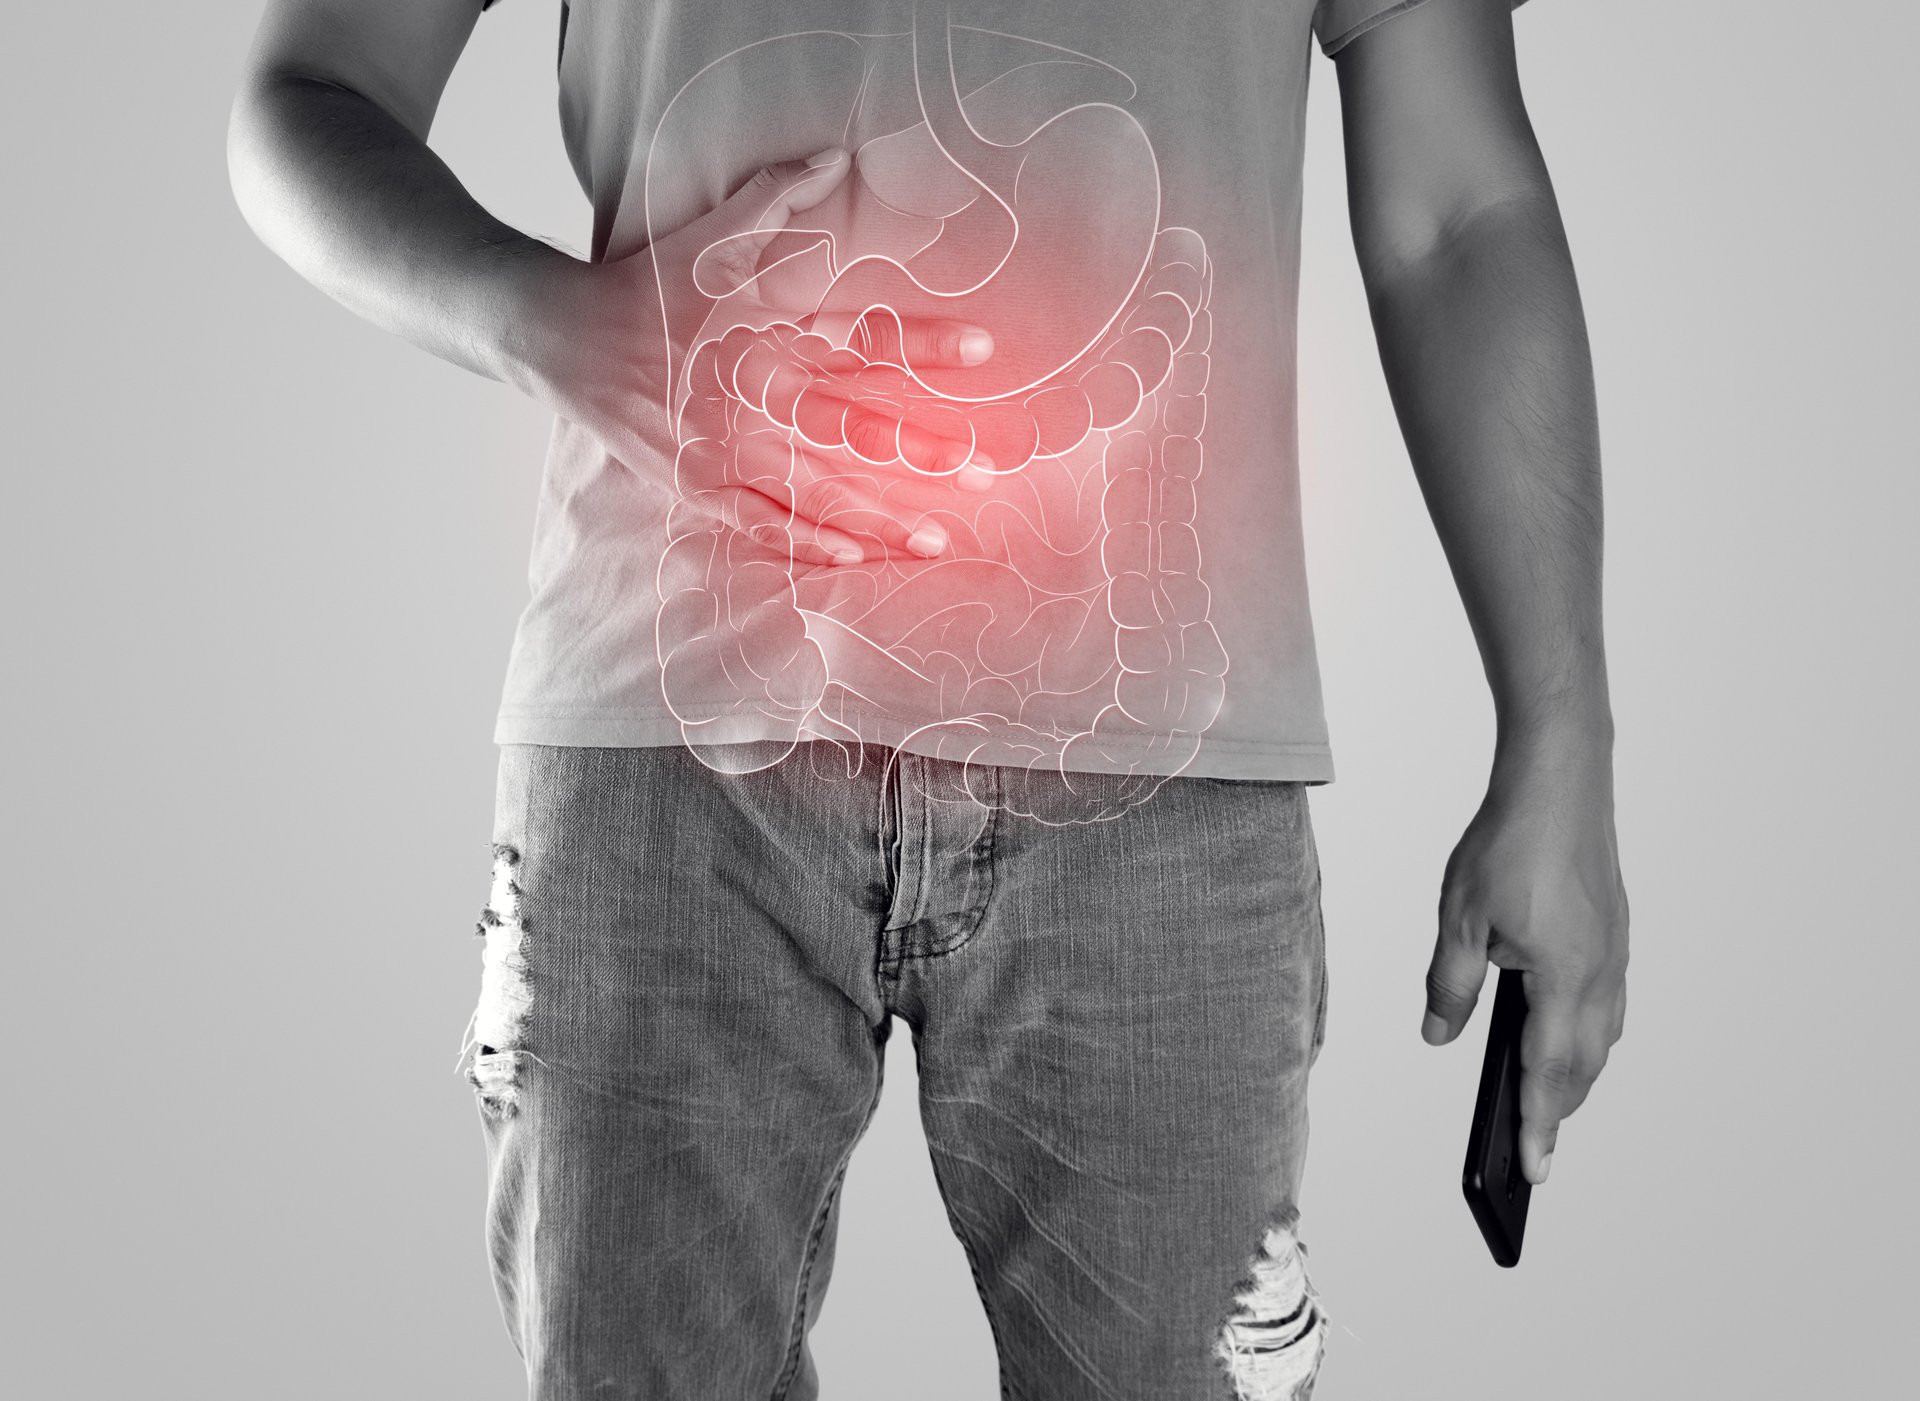 News Picture: Just Being Healthy Might Prevent Many Cases of Crohn's, Colitis